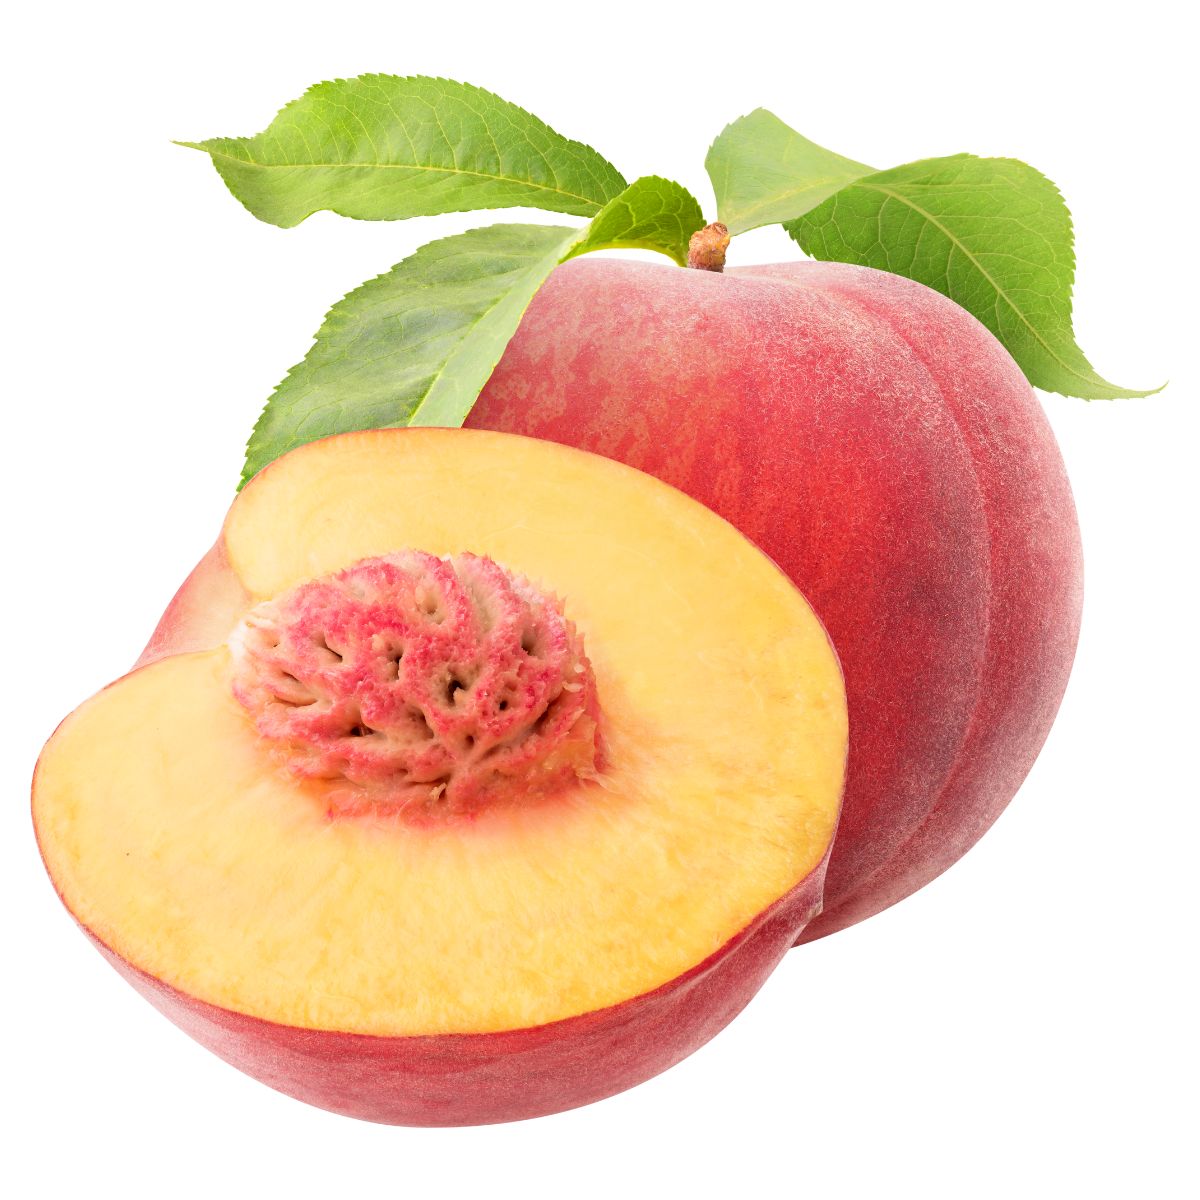 Whole peach and a half with leaves, showing its red skin and vibrant yellow-orange flesh with a visible pit, isolated on a white background. These ripe and juicy Peaches - Each offer a refreshing flavour.